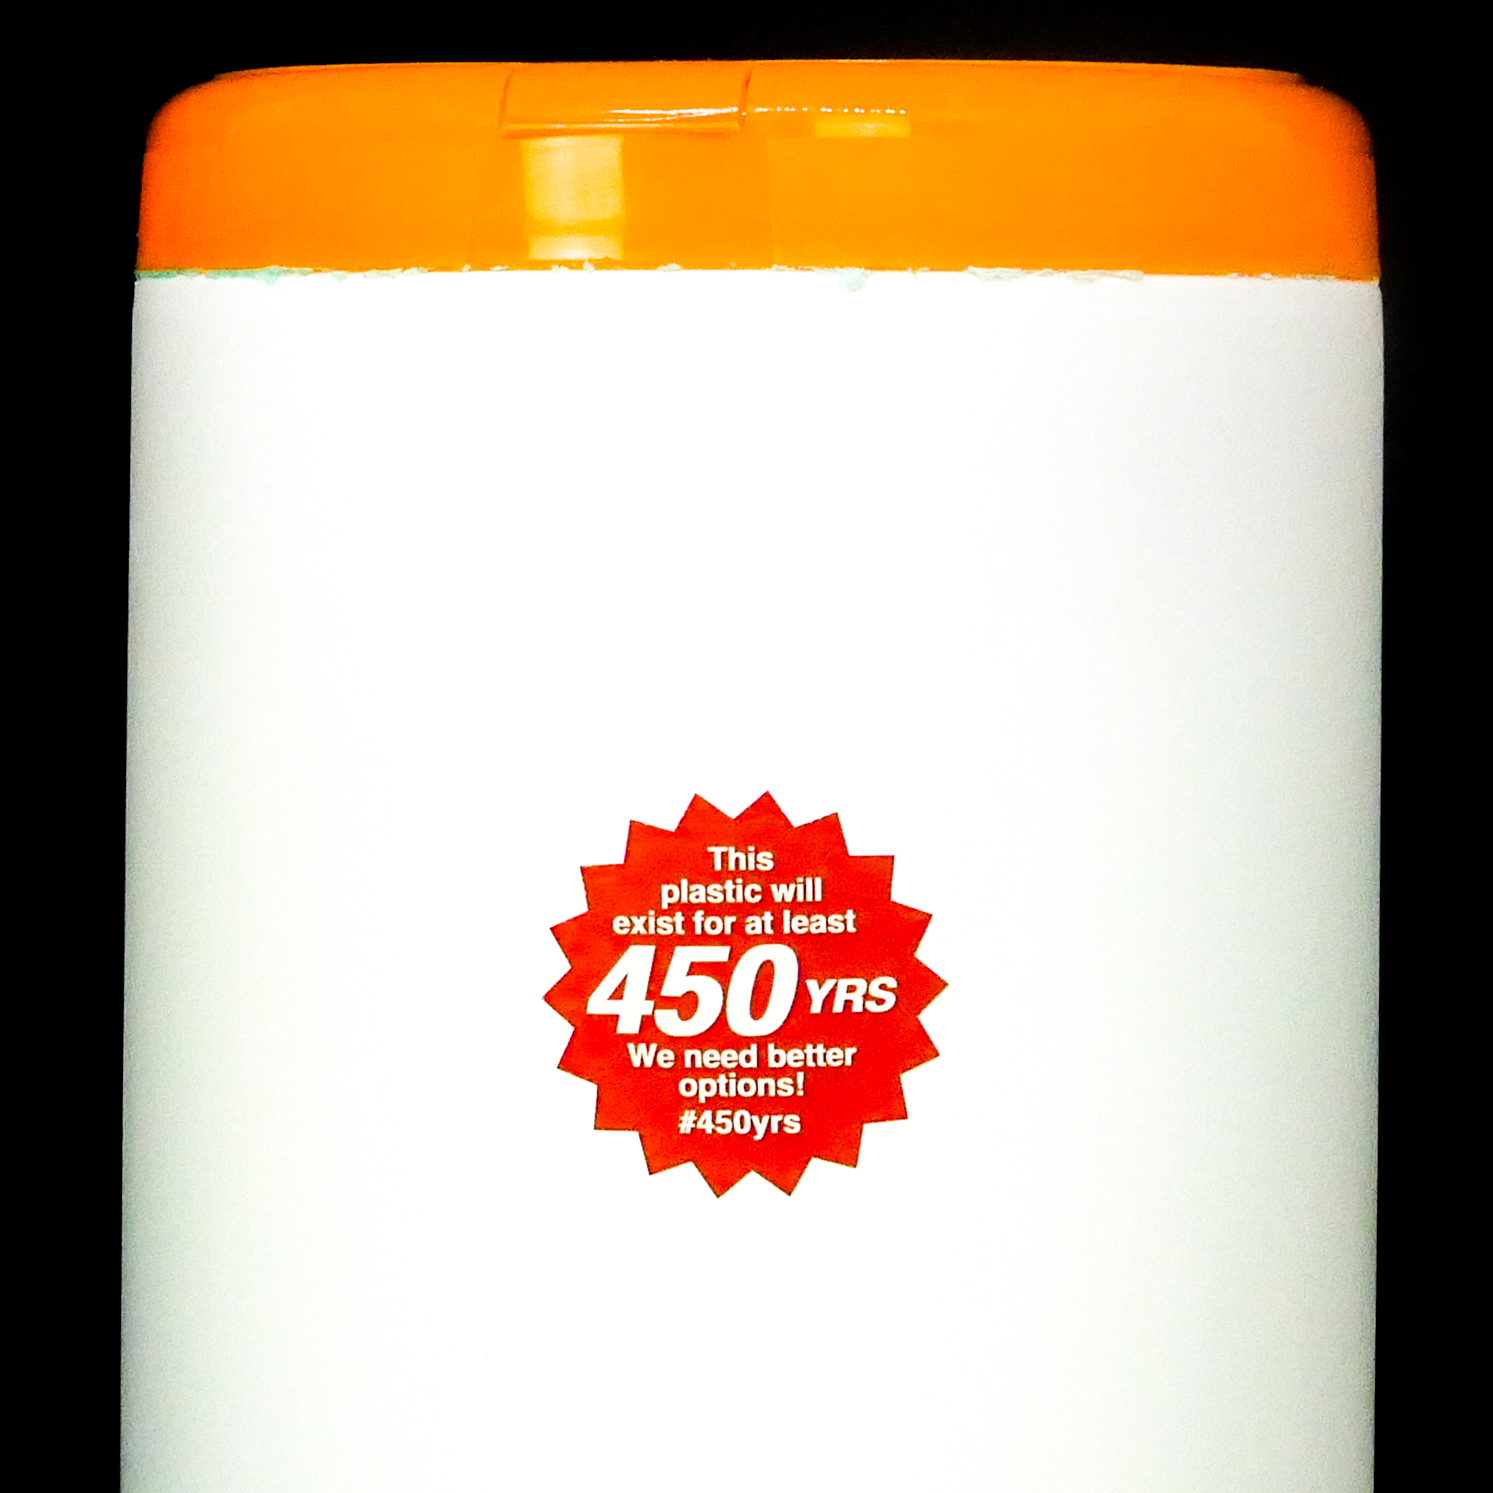 Thumbnail of Close-up photograph of a white, cylindrical shaped plastic container with an orange lid. Stuck on the container, is a red, starburst-shaped sticker that says, 'This plastic will exist for at least 450 YRS. We need better options! #450yrs.'